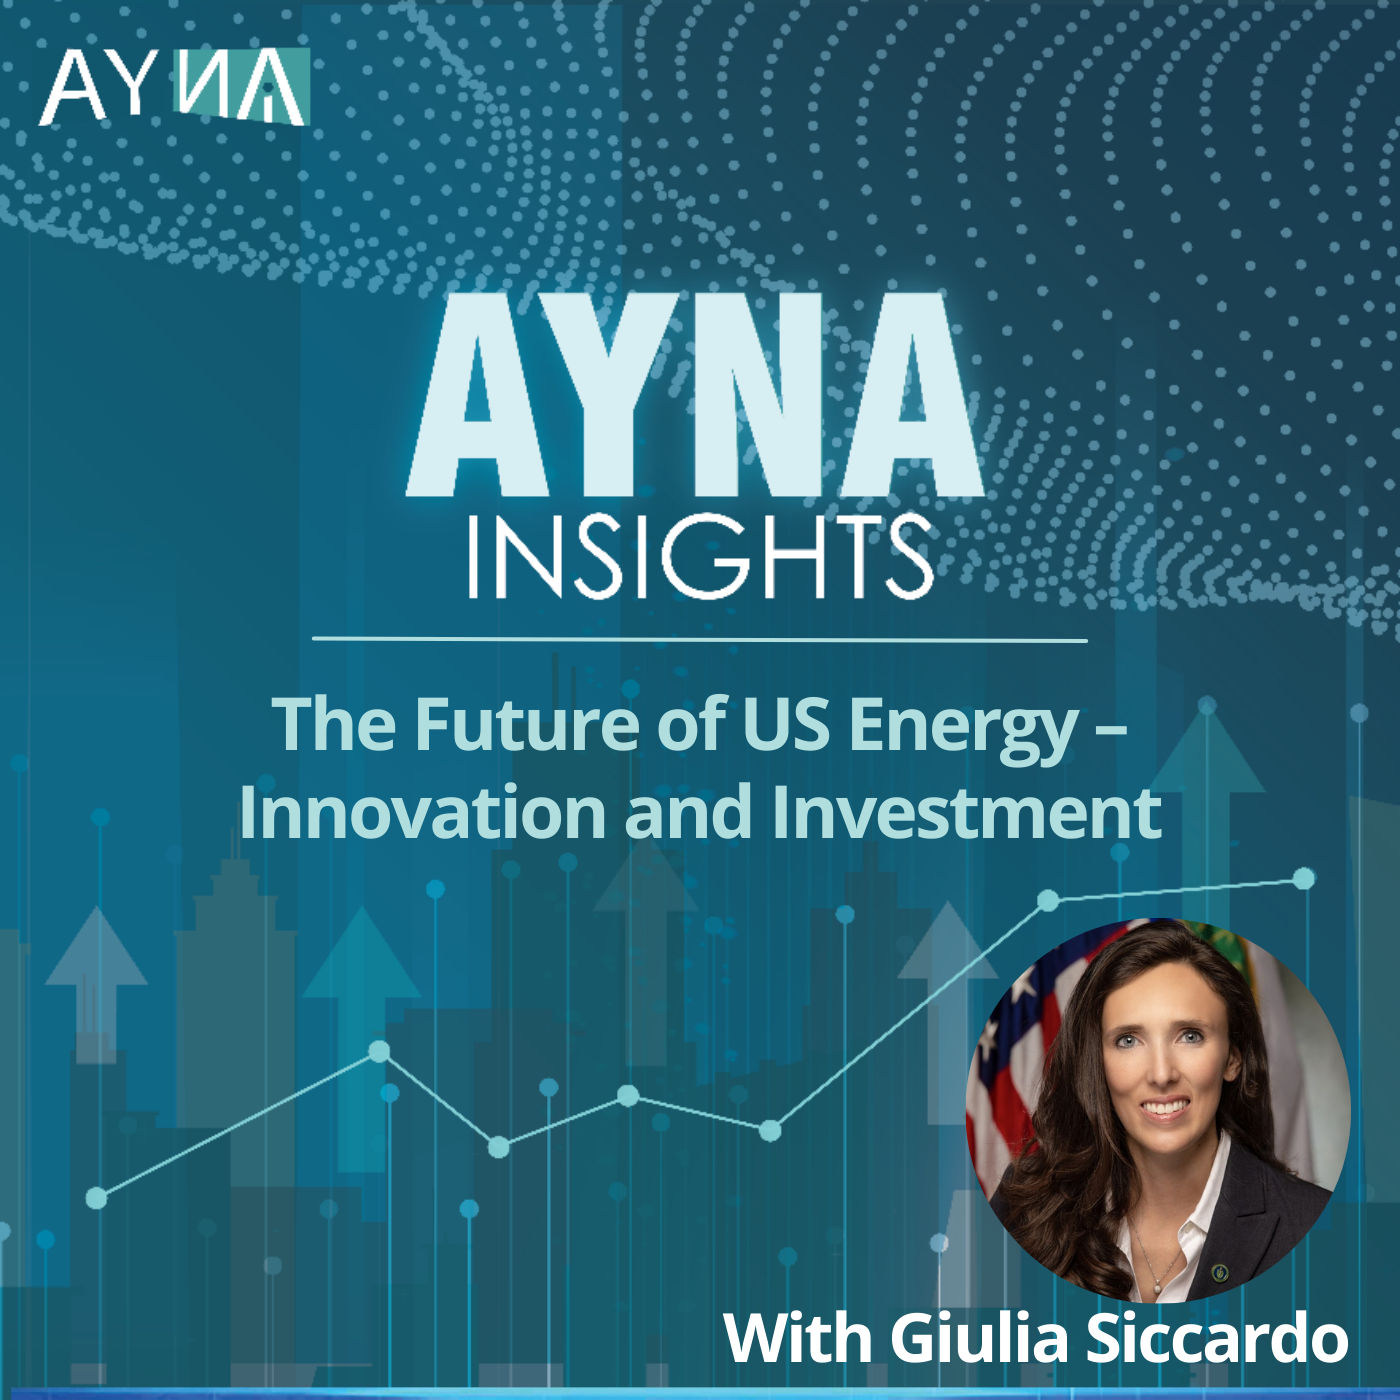 Giulia Siccardo: The Future of US Energy – Innovation and Investment